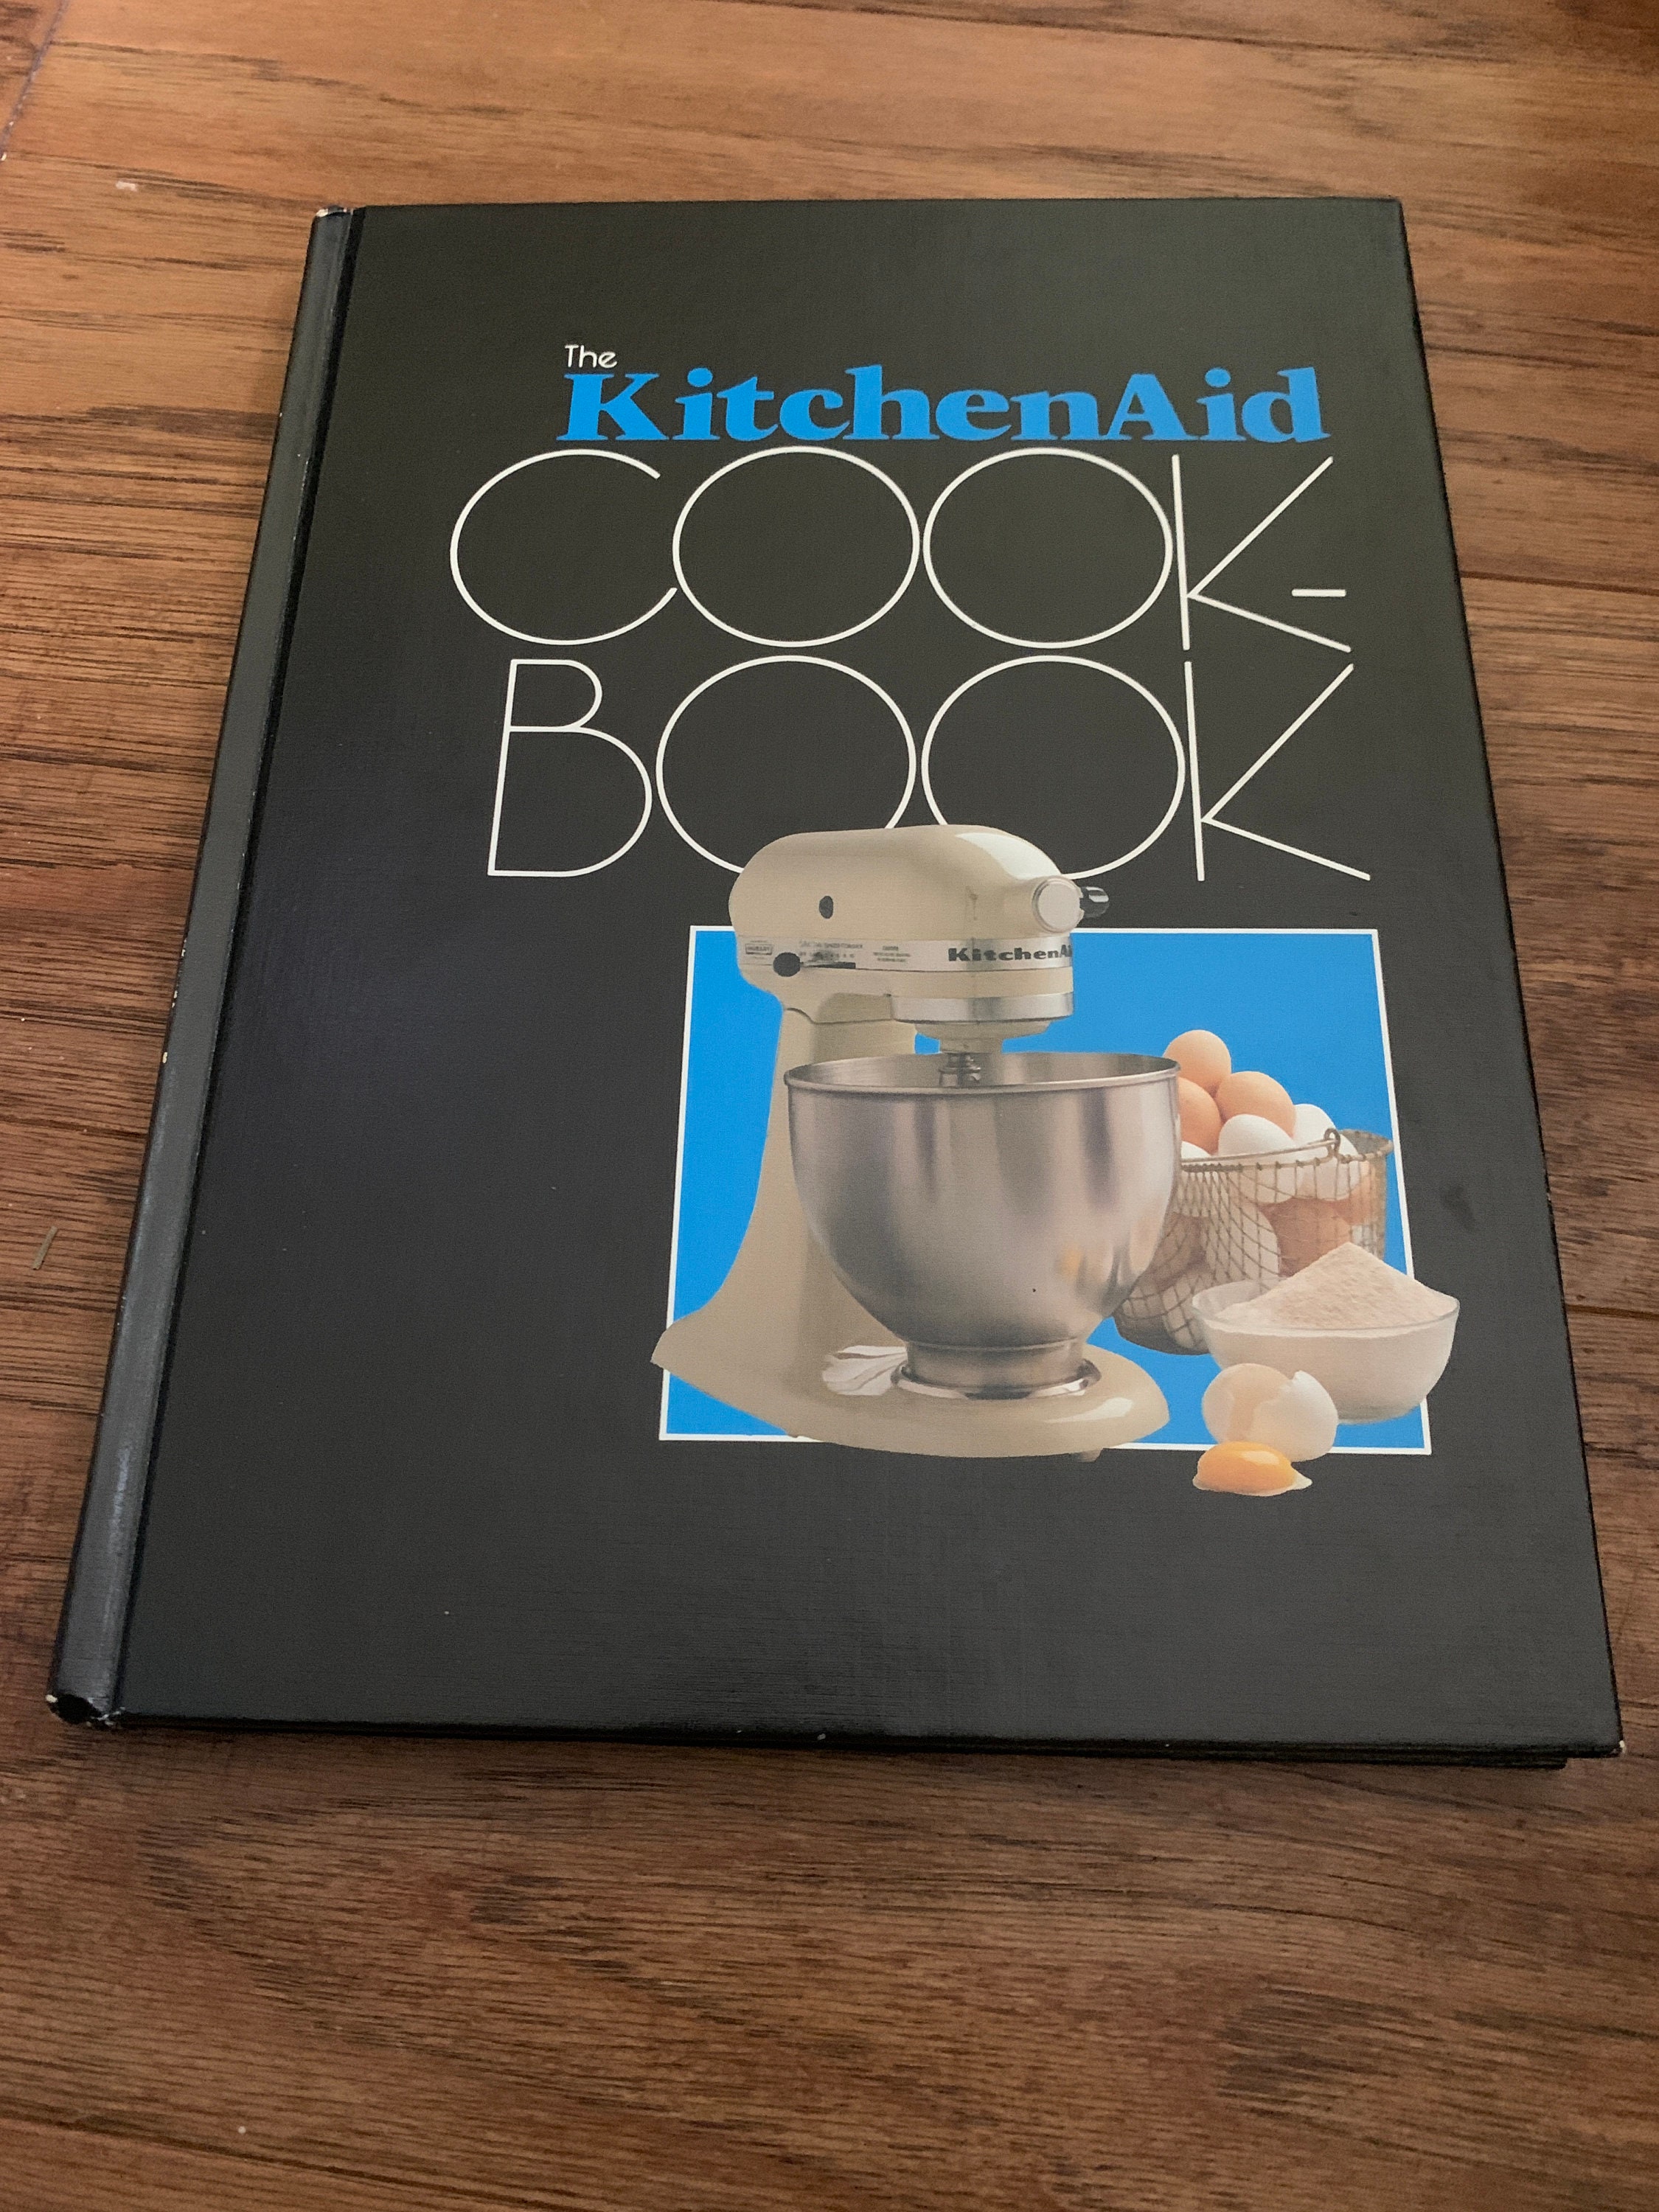 Kitchenaid Stand Mixer Instructions Recipes 2001 Softcover Vintage Cookbook